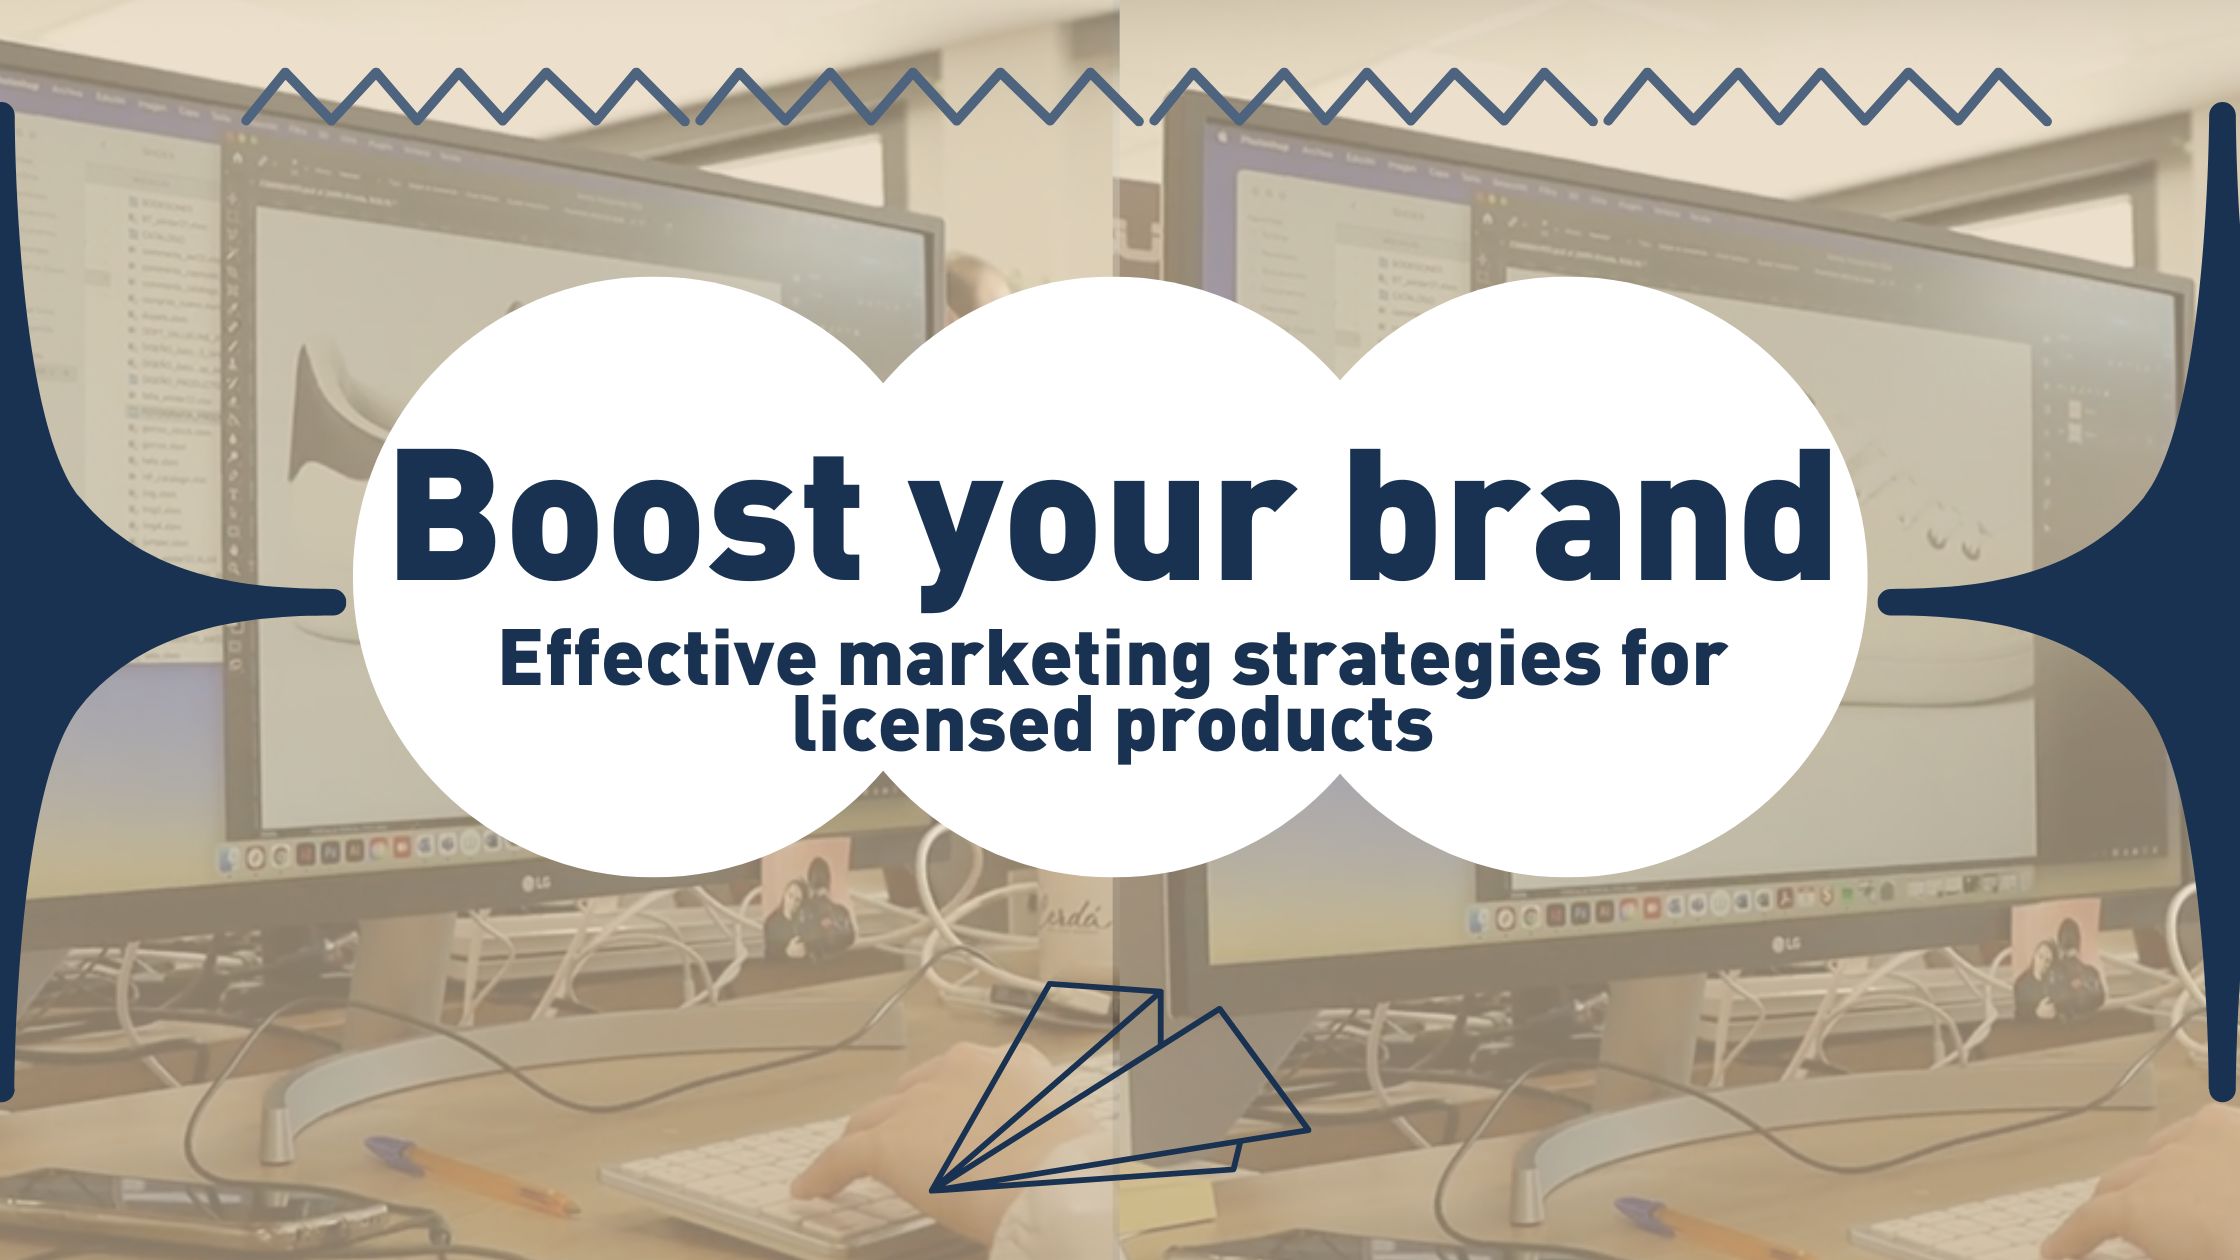 Boost your brand. Effective marketing strategies for licensed products.